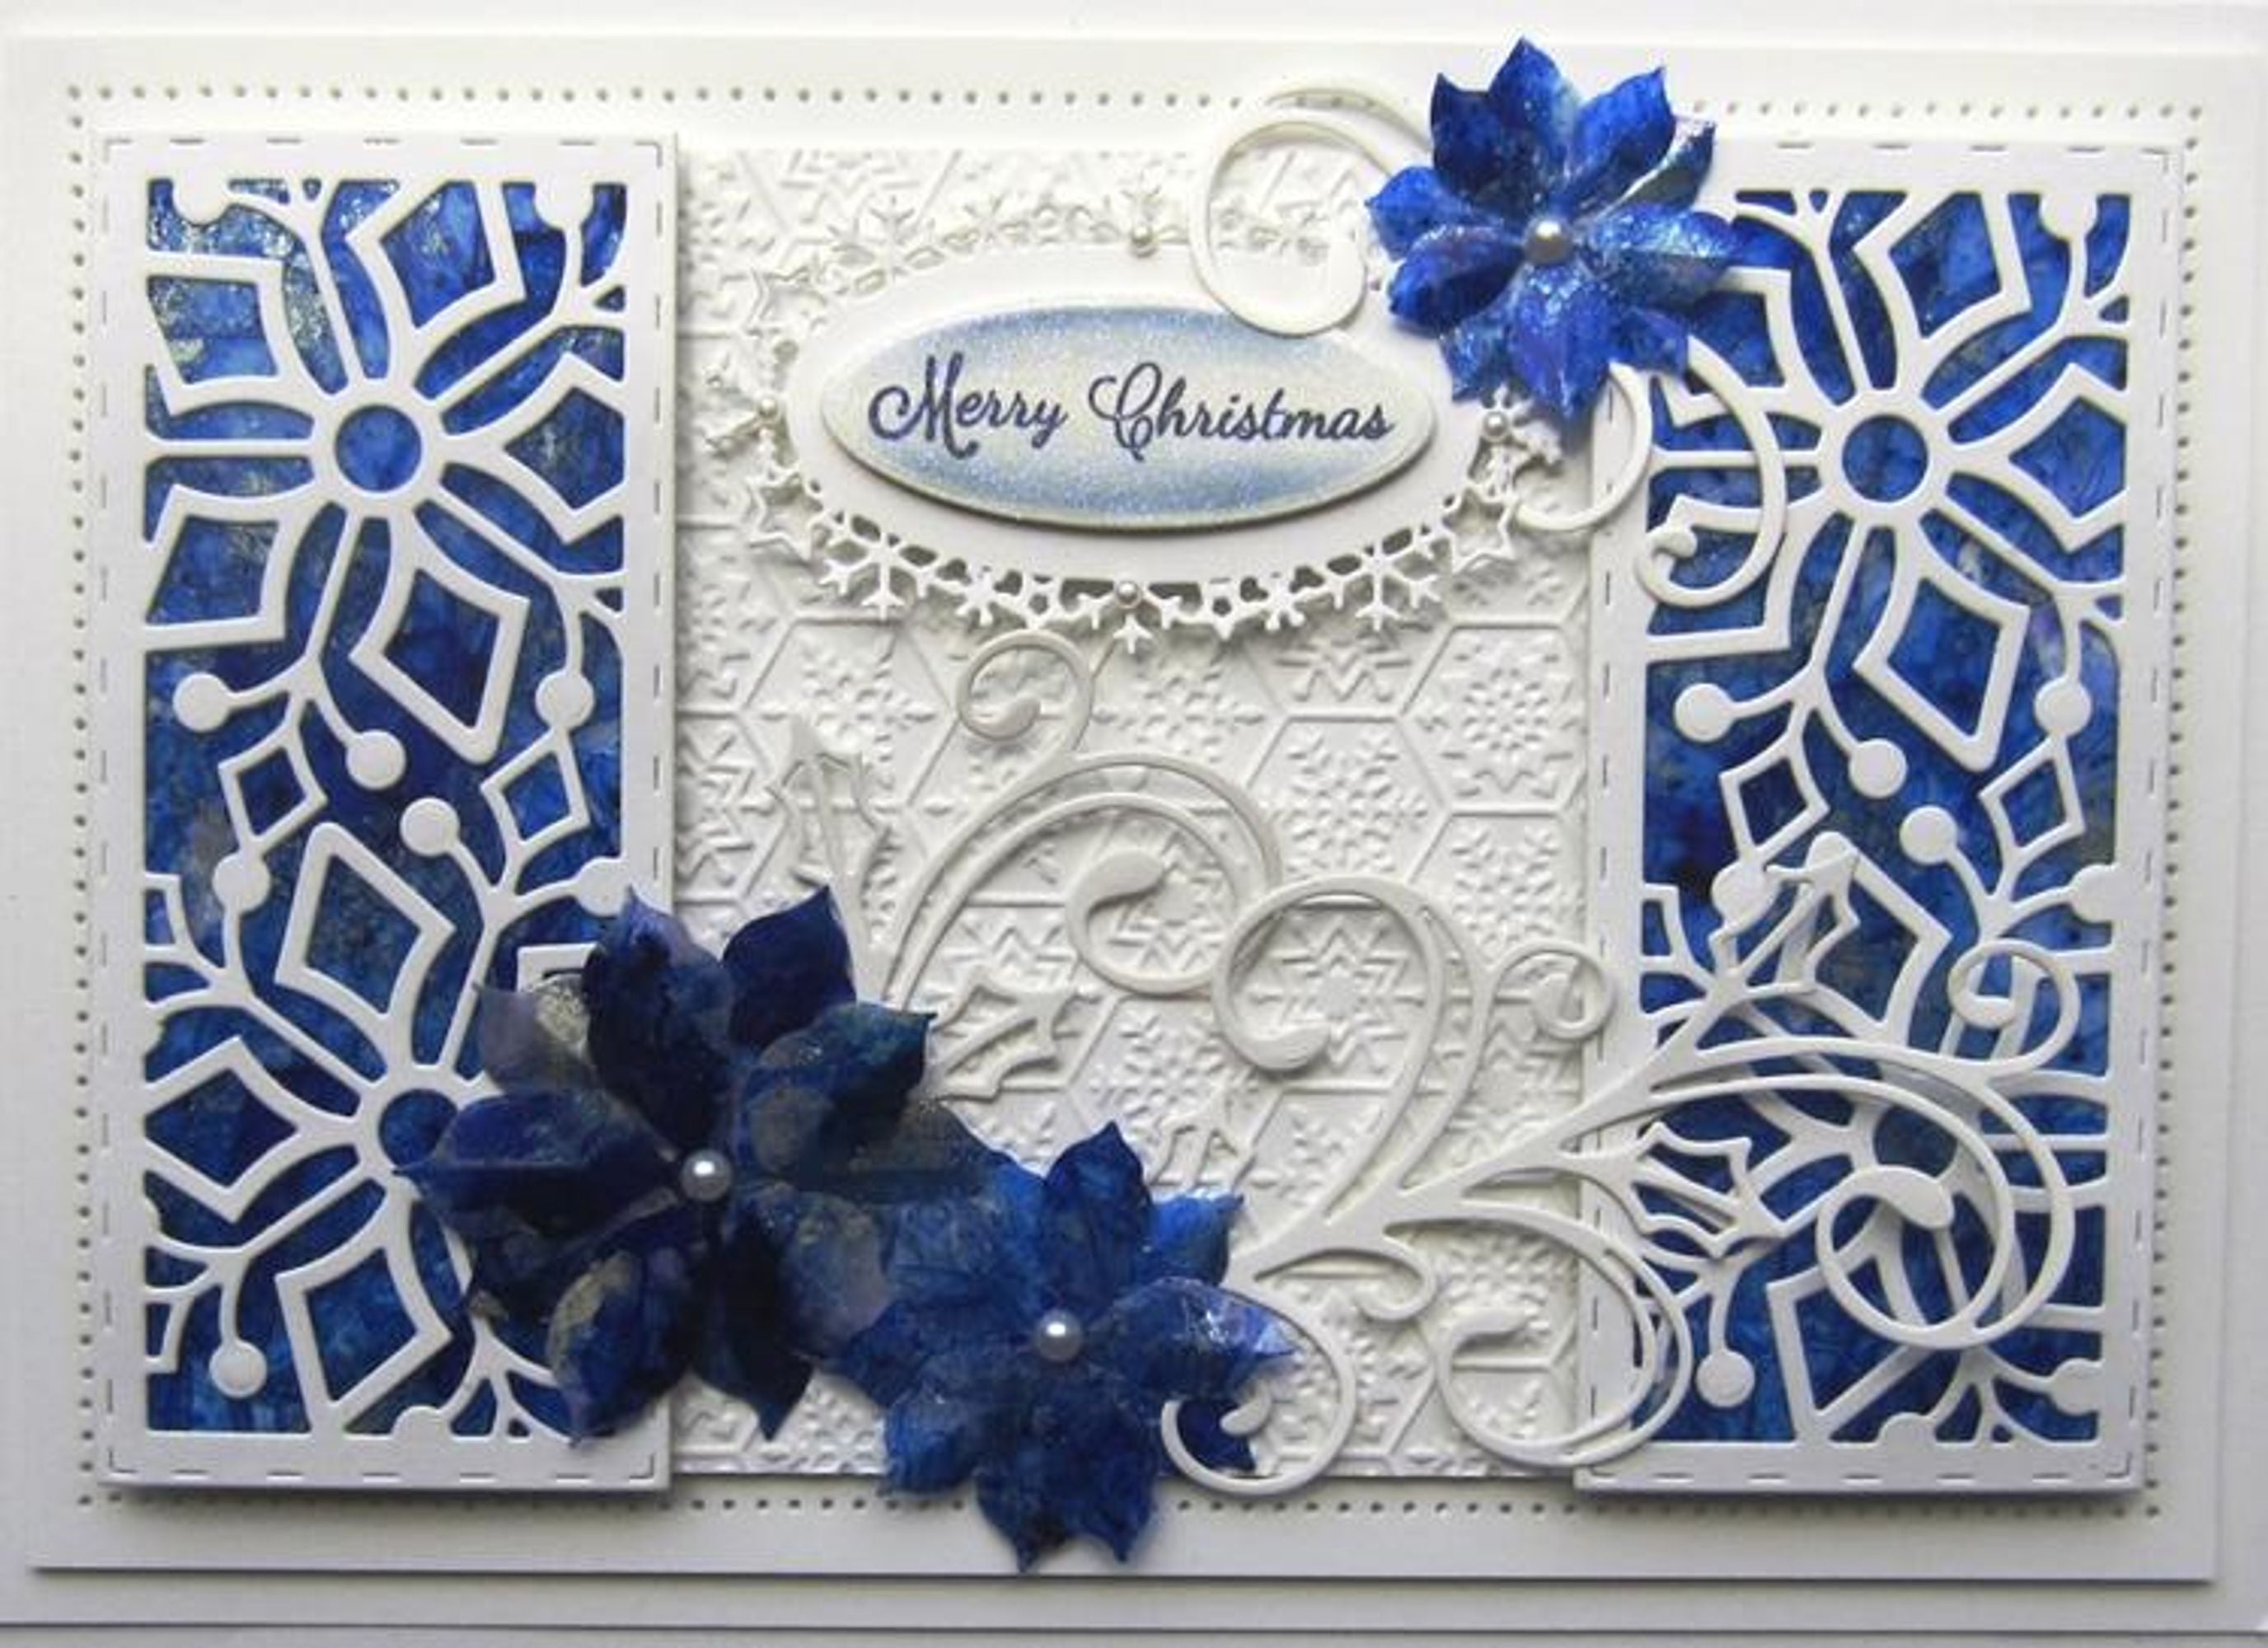 Festive Collection Stitched Snowflake Striplet